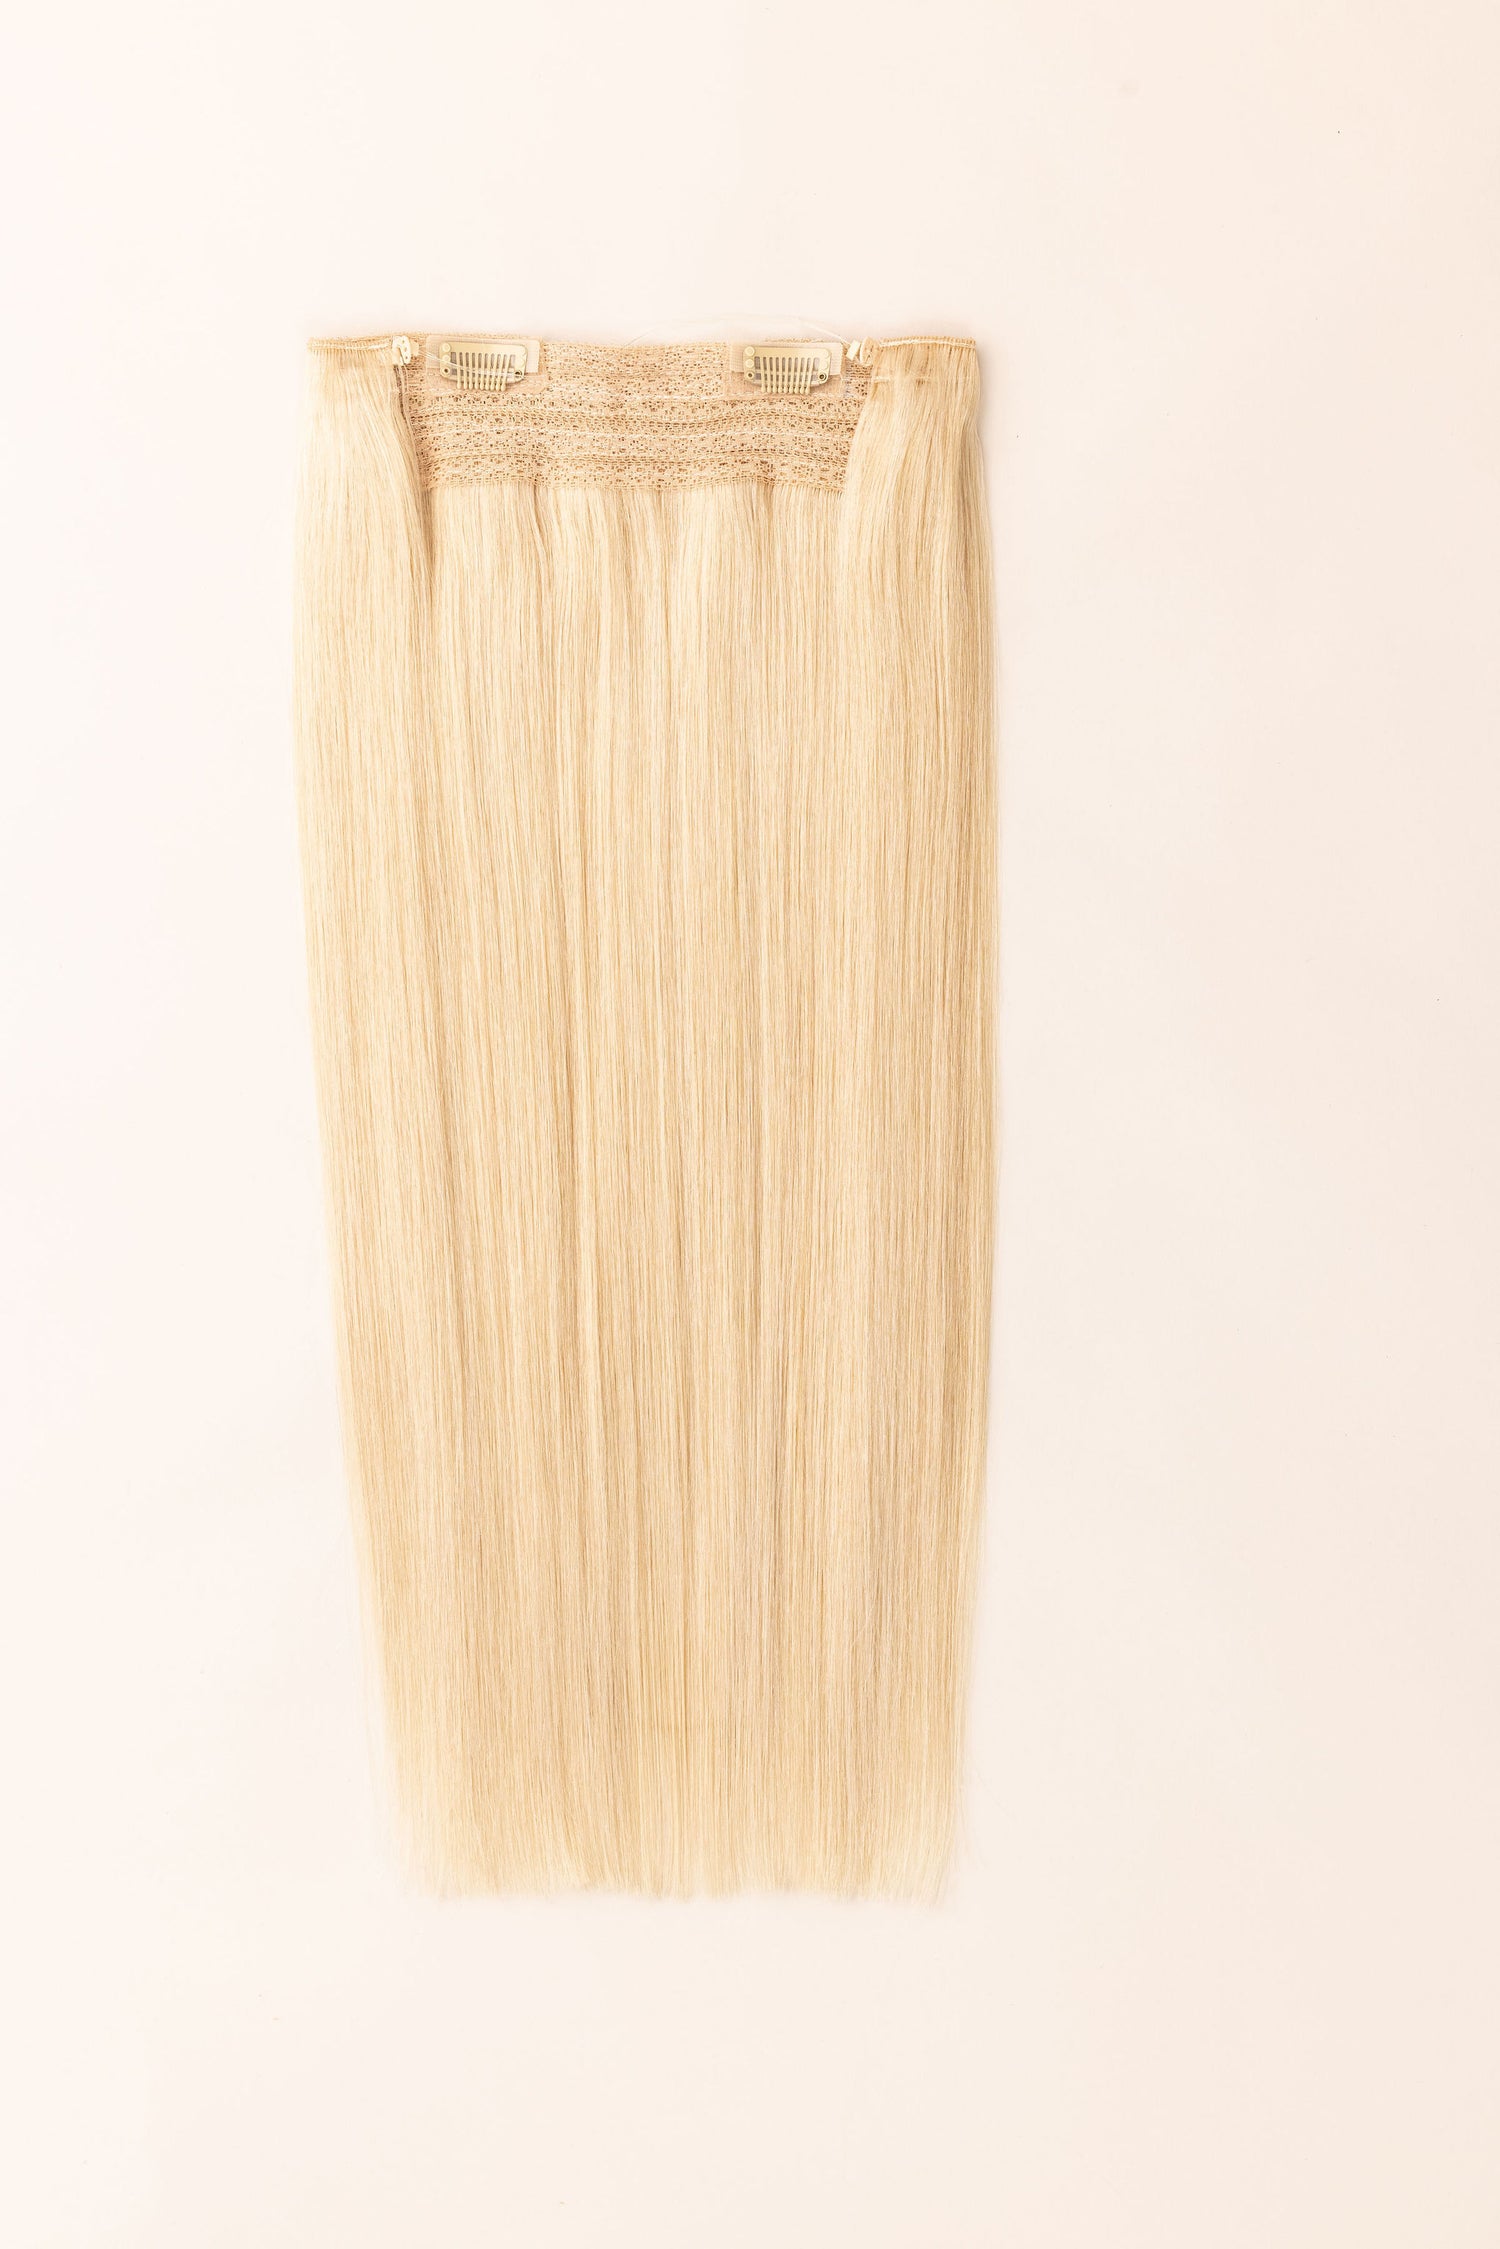 Classic Lace Halo - 1 Piece - Human Remy Hair Extension